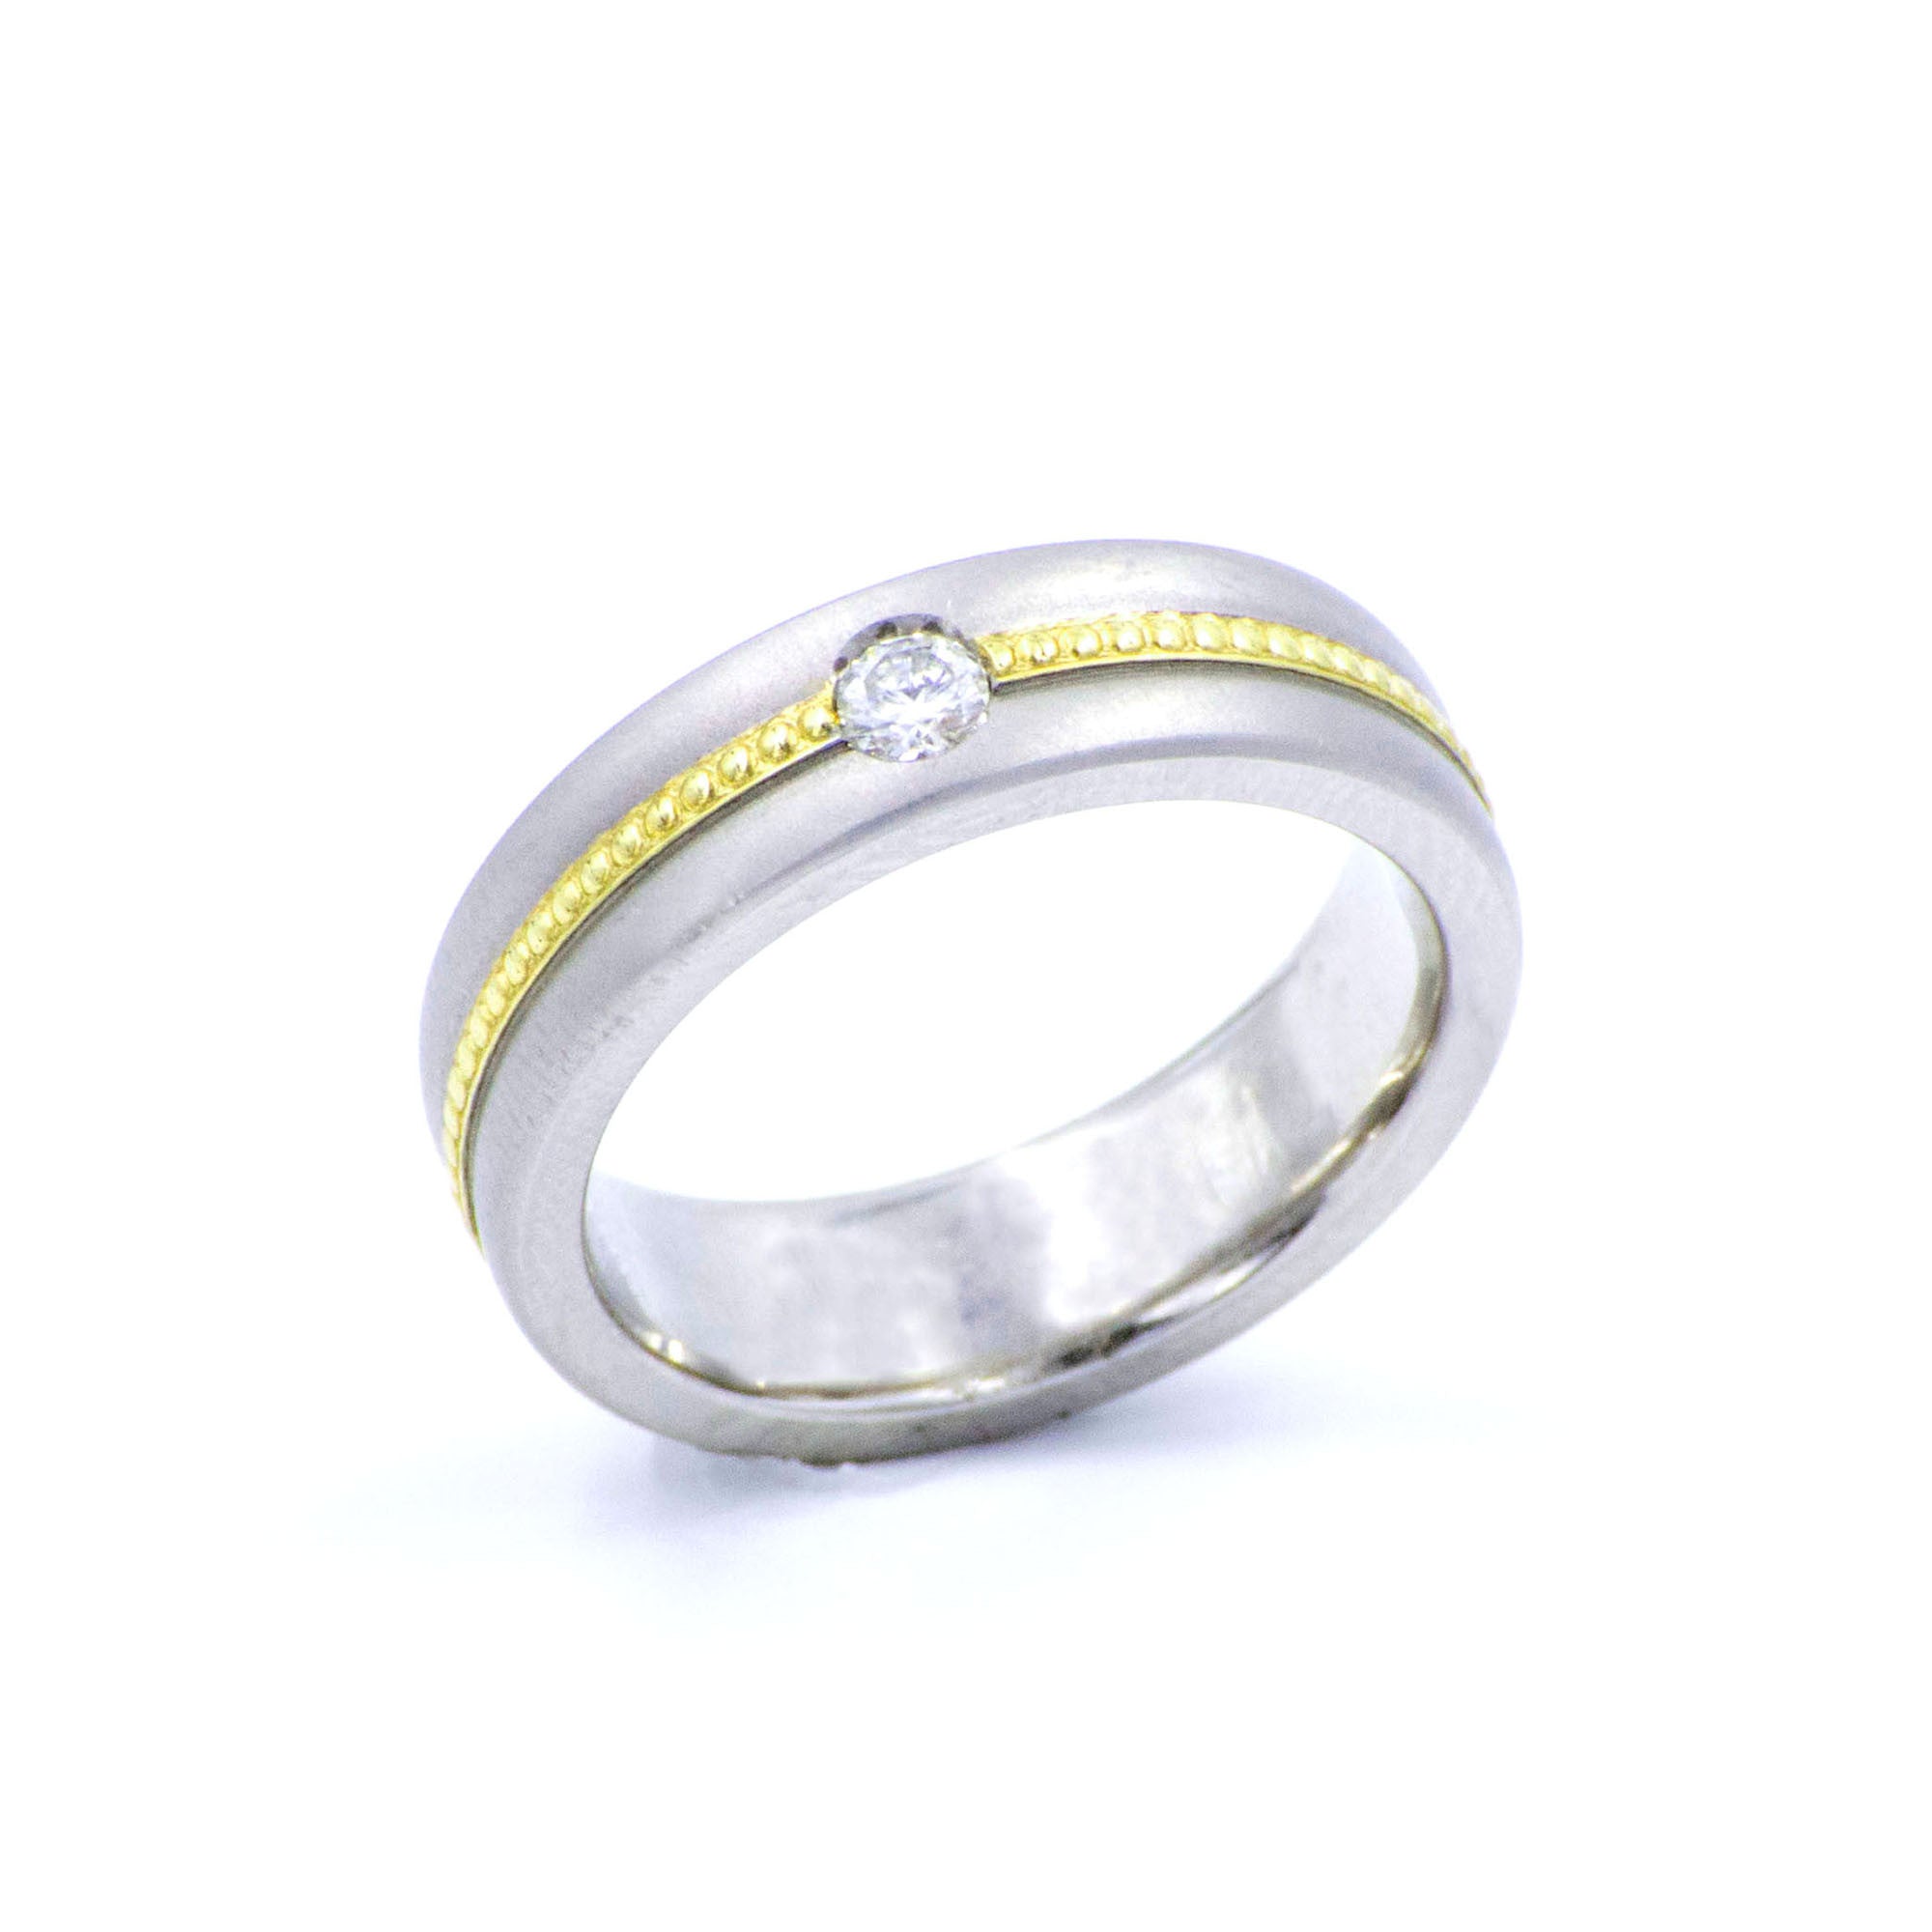 Men's Diamond 14k White and Yellow Gold Wedding Band Eternity Style Rope and Satin Design